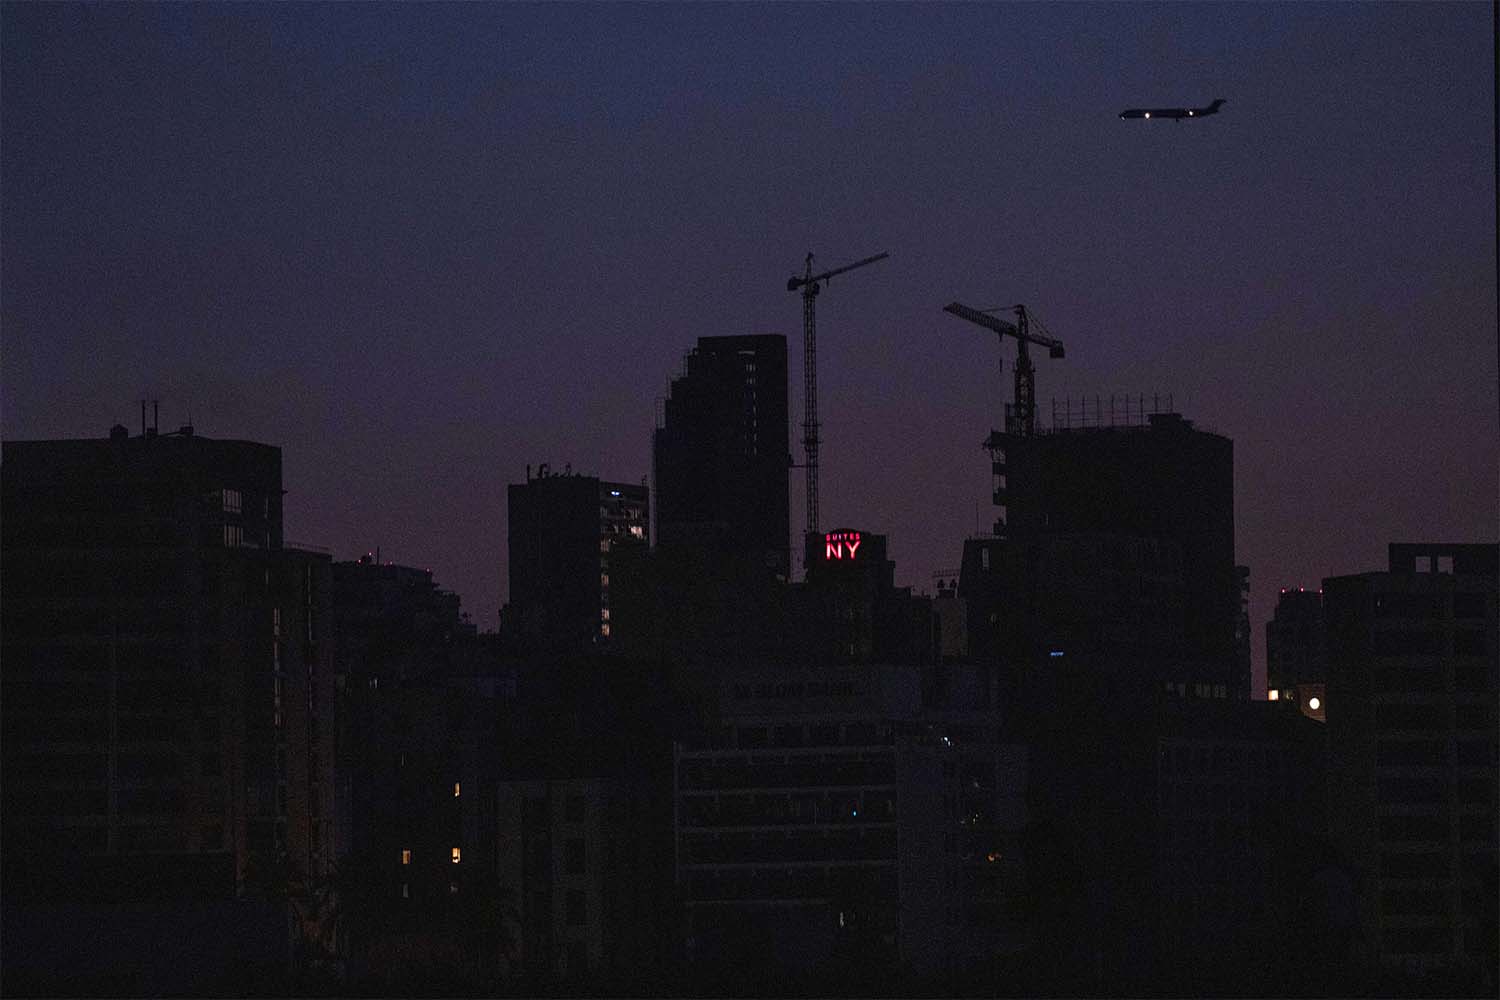 Beirut remains in darkness during a power outage